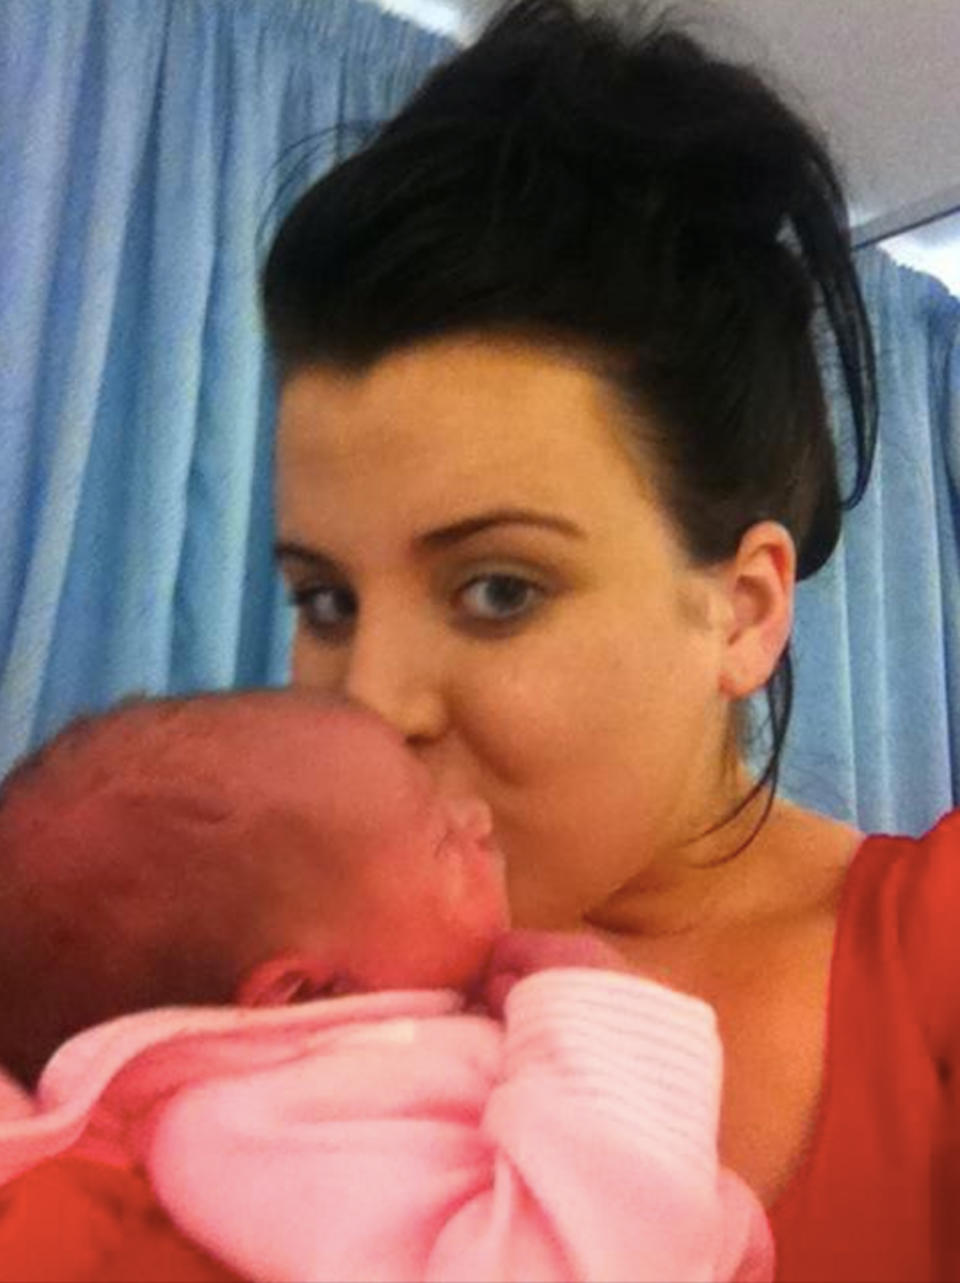 Nicole Moore kisses her newborn daughter Tilly in the hospital after giving birth